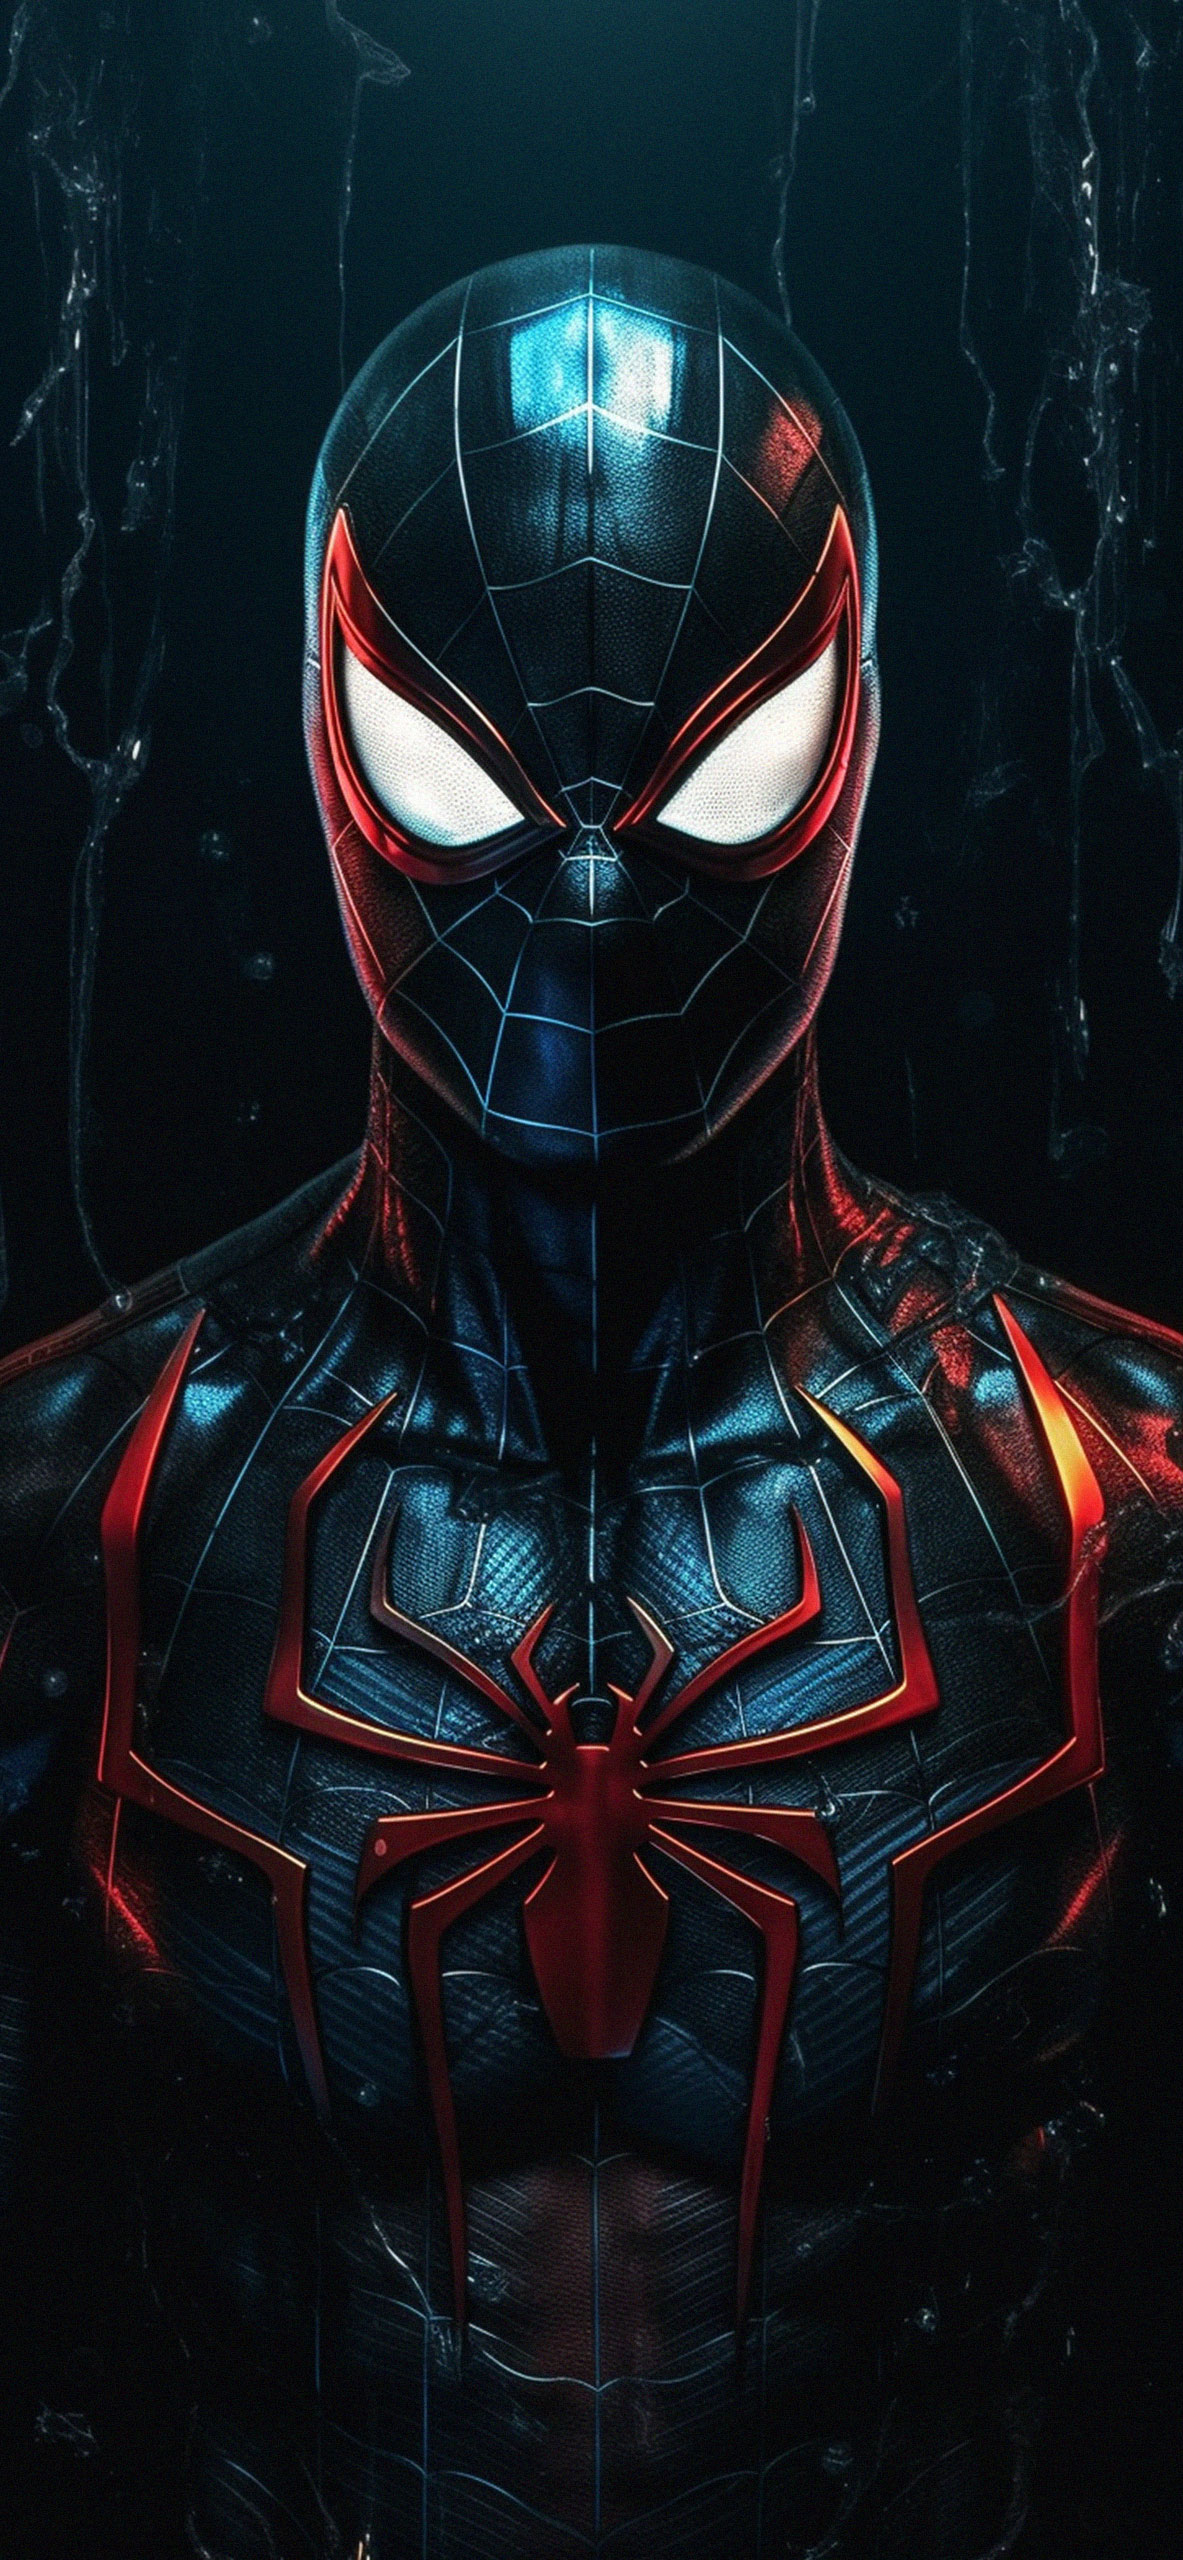 Spider Man wallpaper by HotWallpapers  Download on ZEDGE  e19d